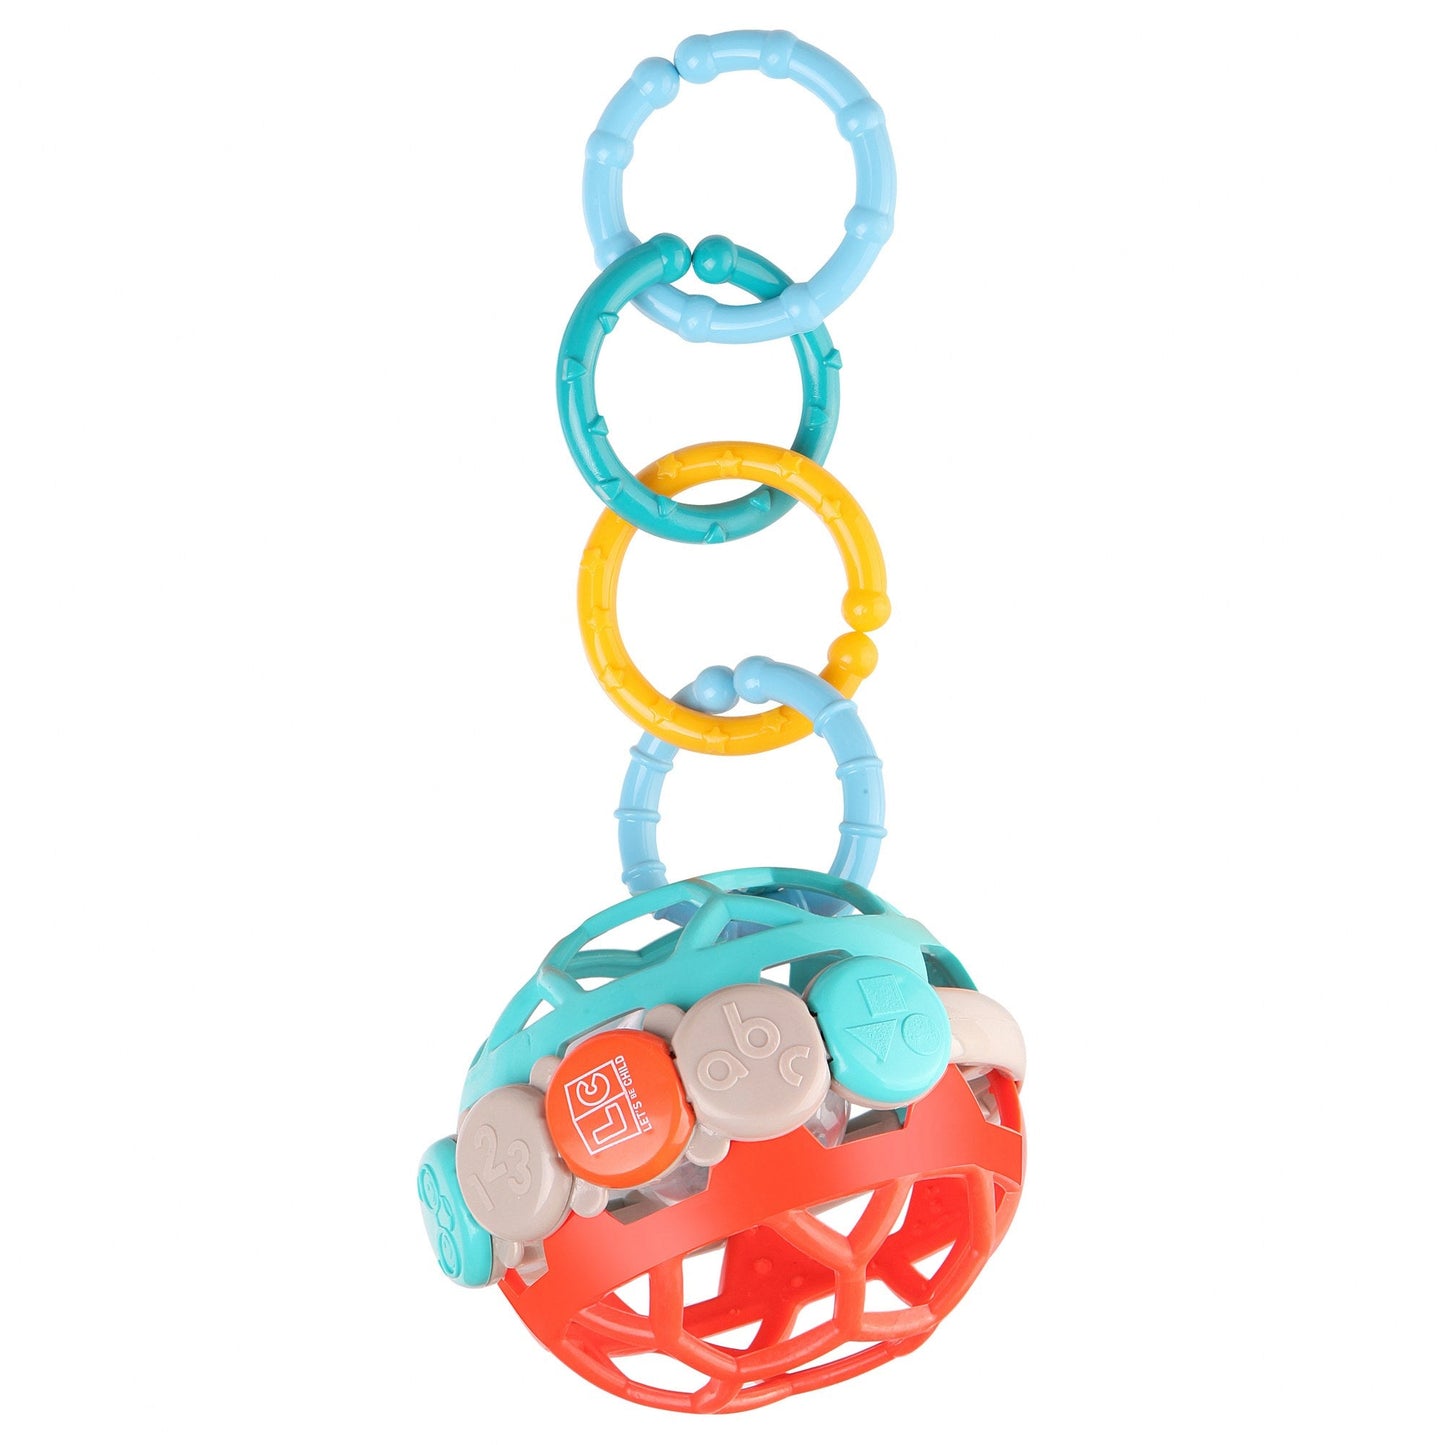 Let's Be Child - Rattle Flexi Ball with Hangers